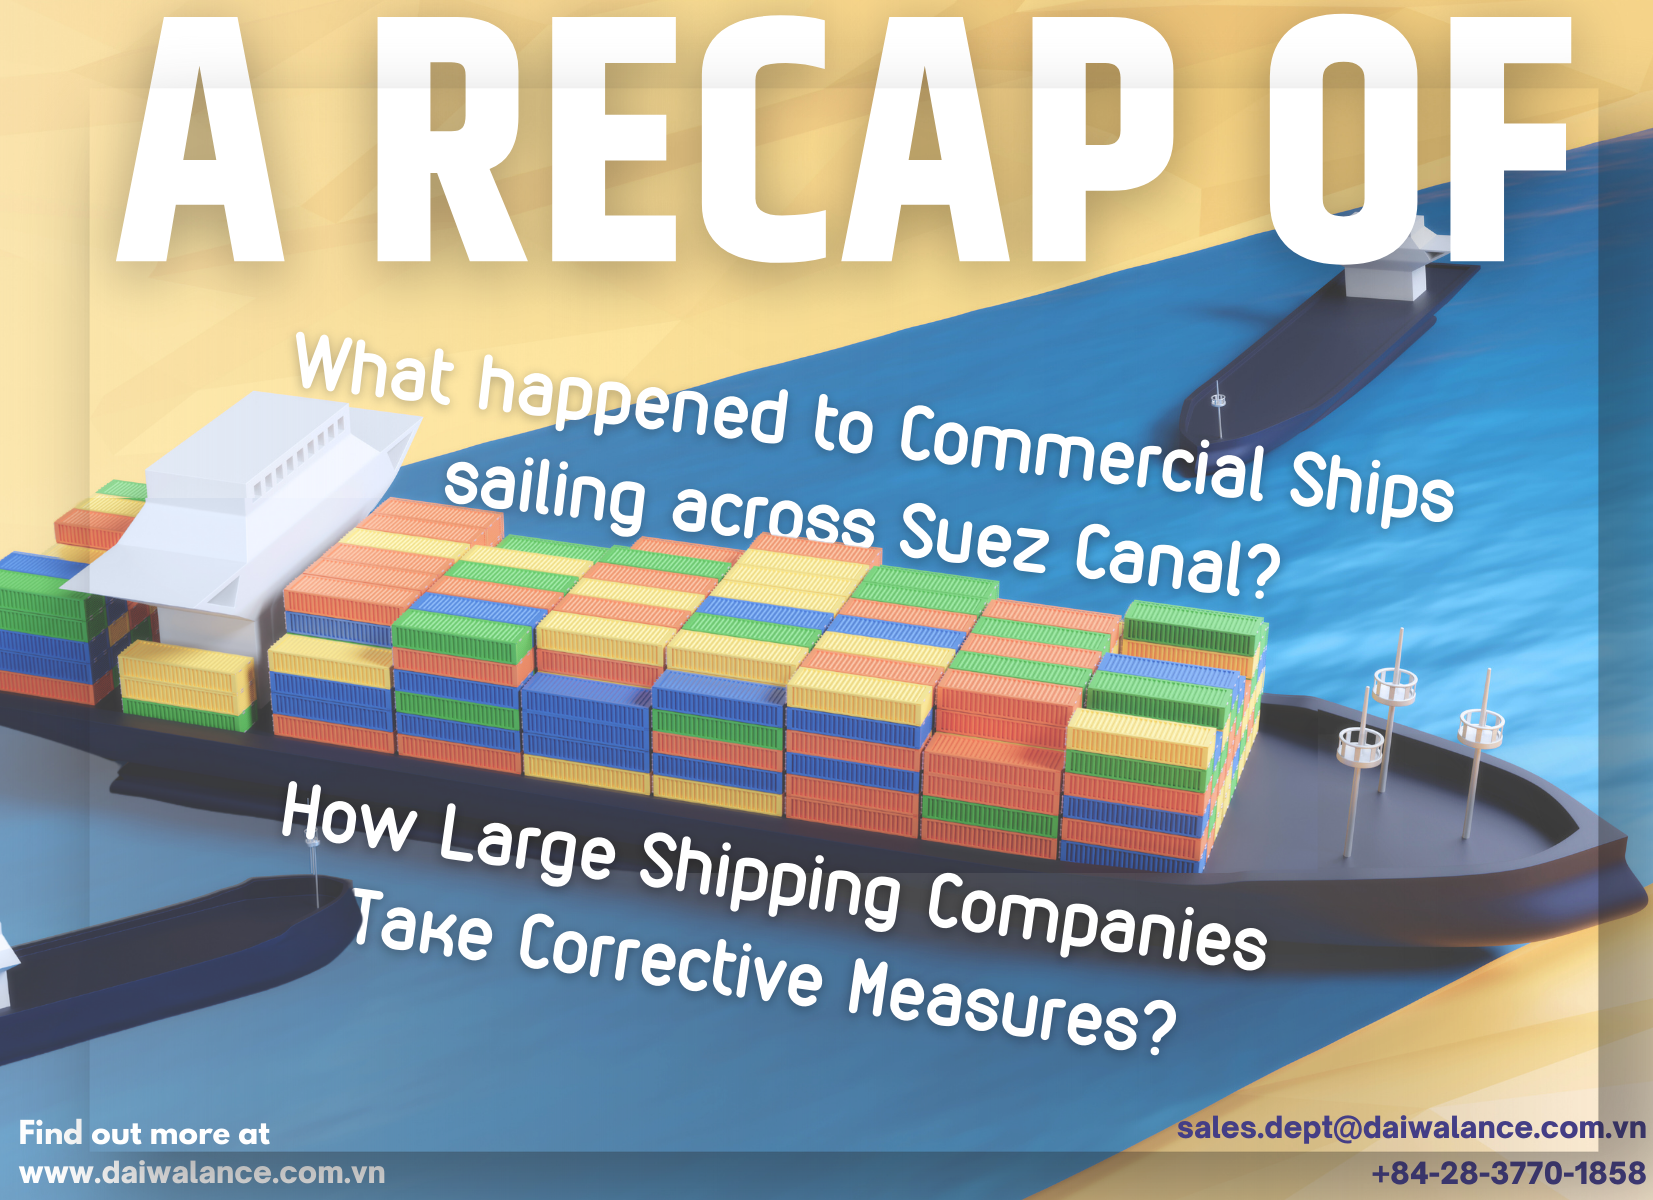 A Recap of What Happened to Commercial Ships Sailing Across Suez Canal